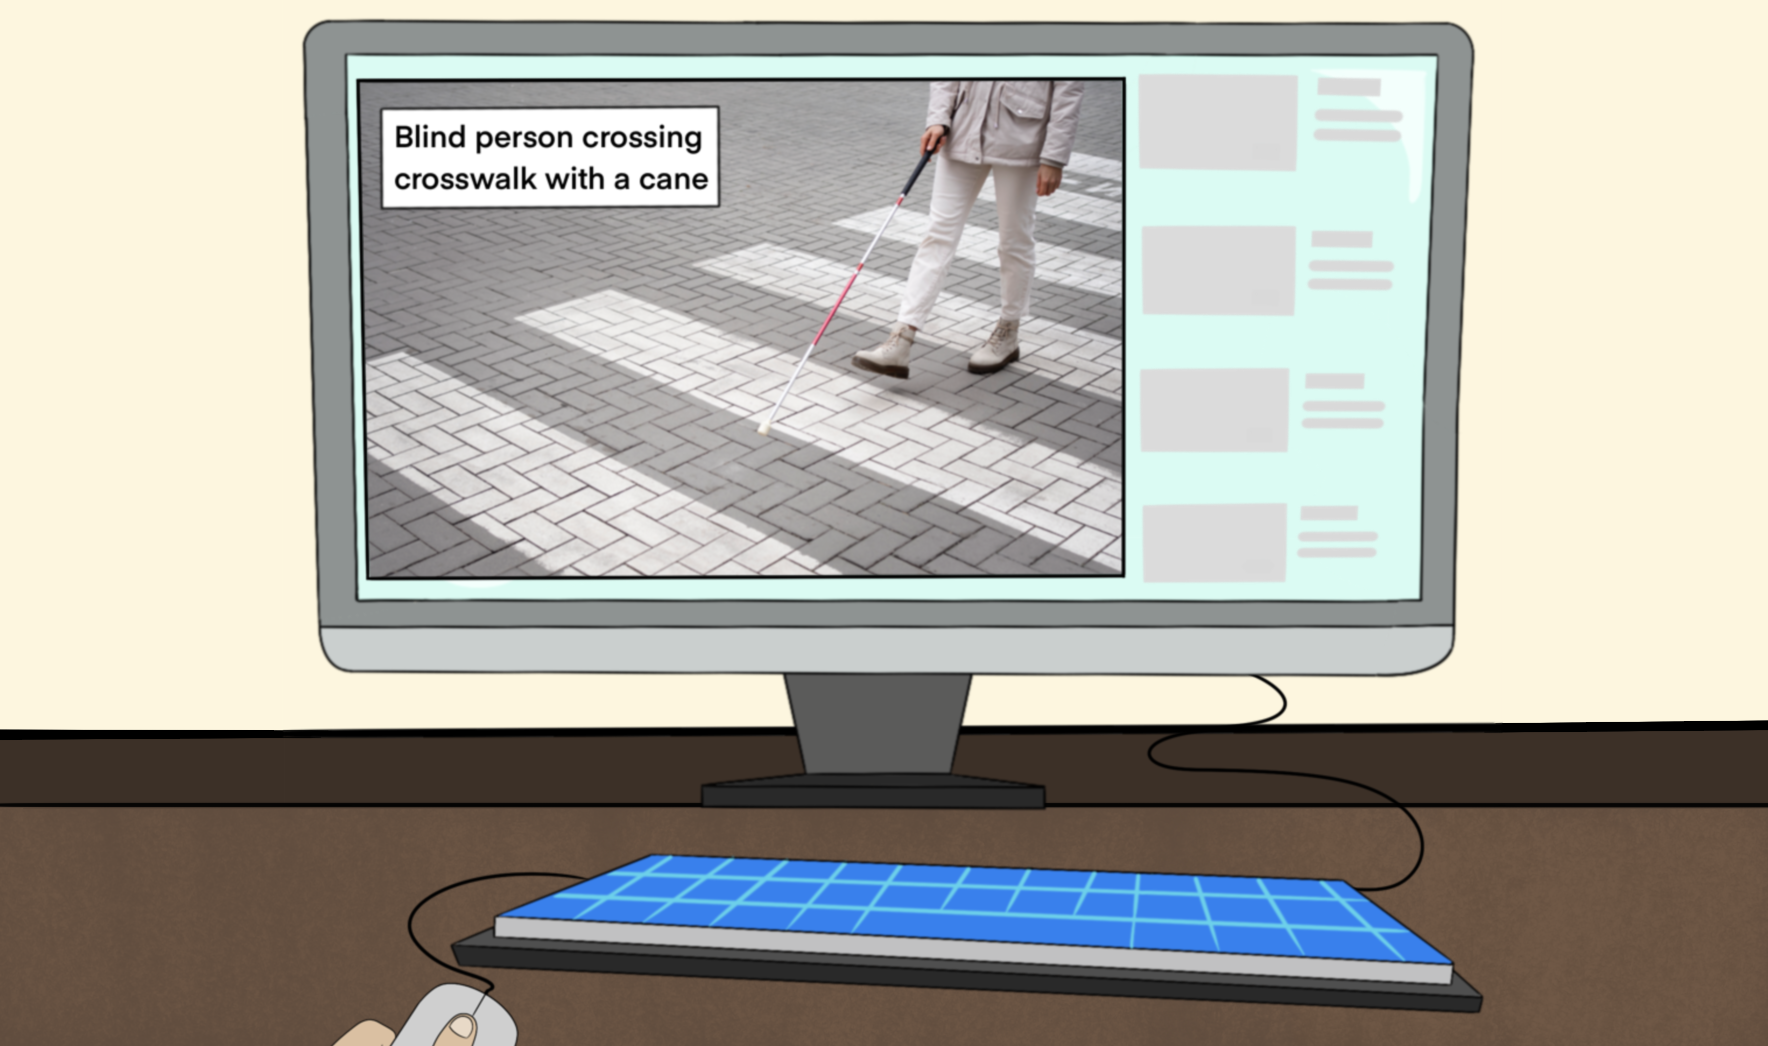 Computer screen showing image of blind person crossing the street